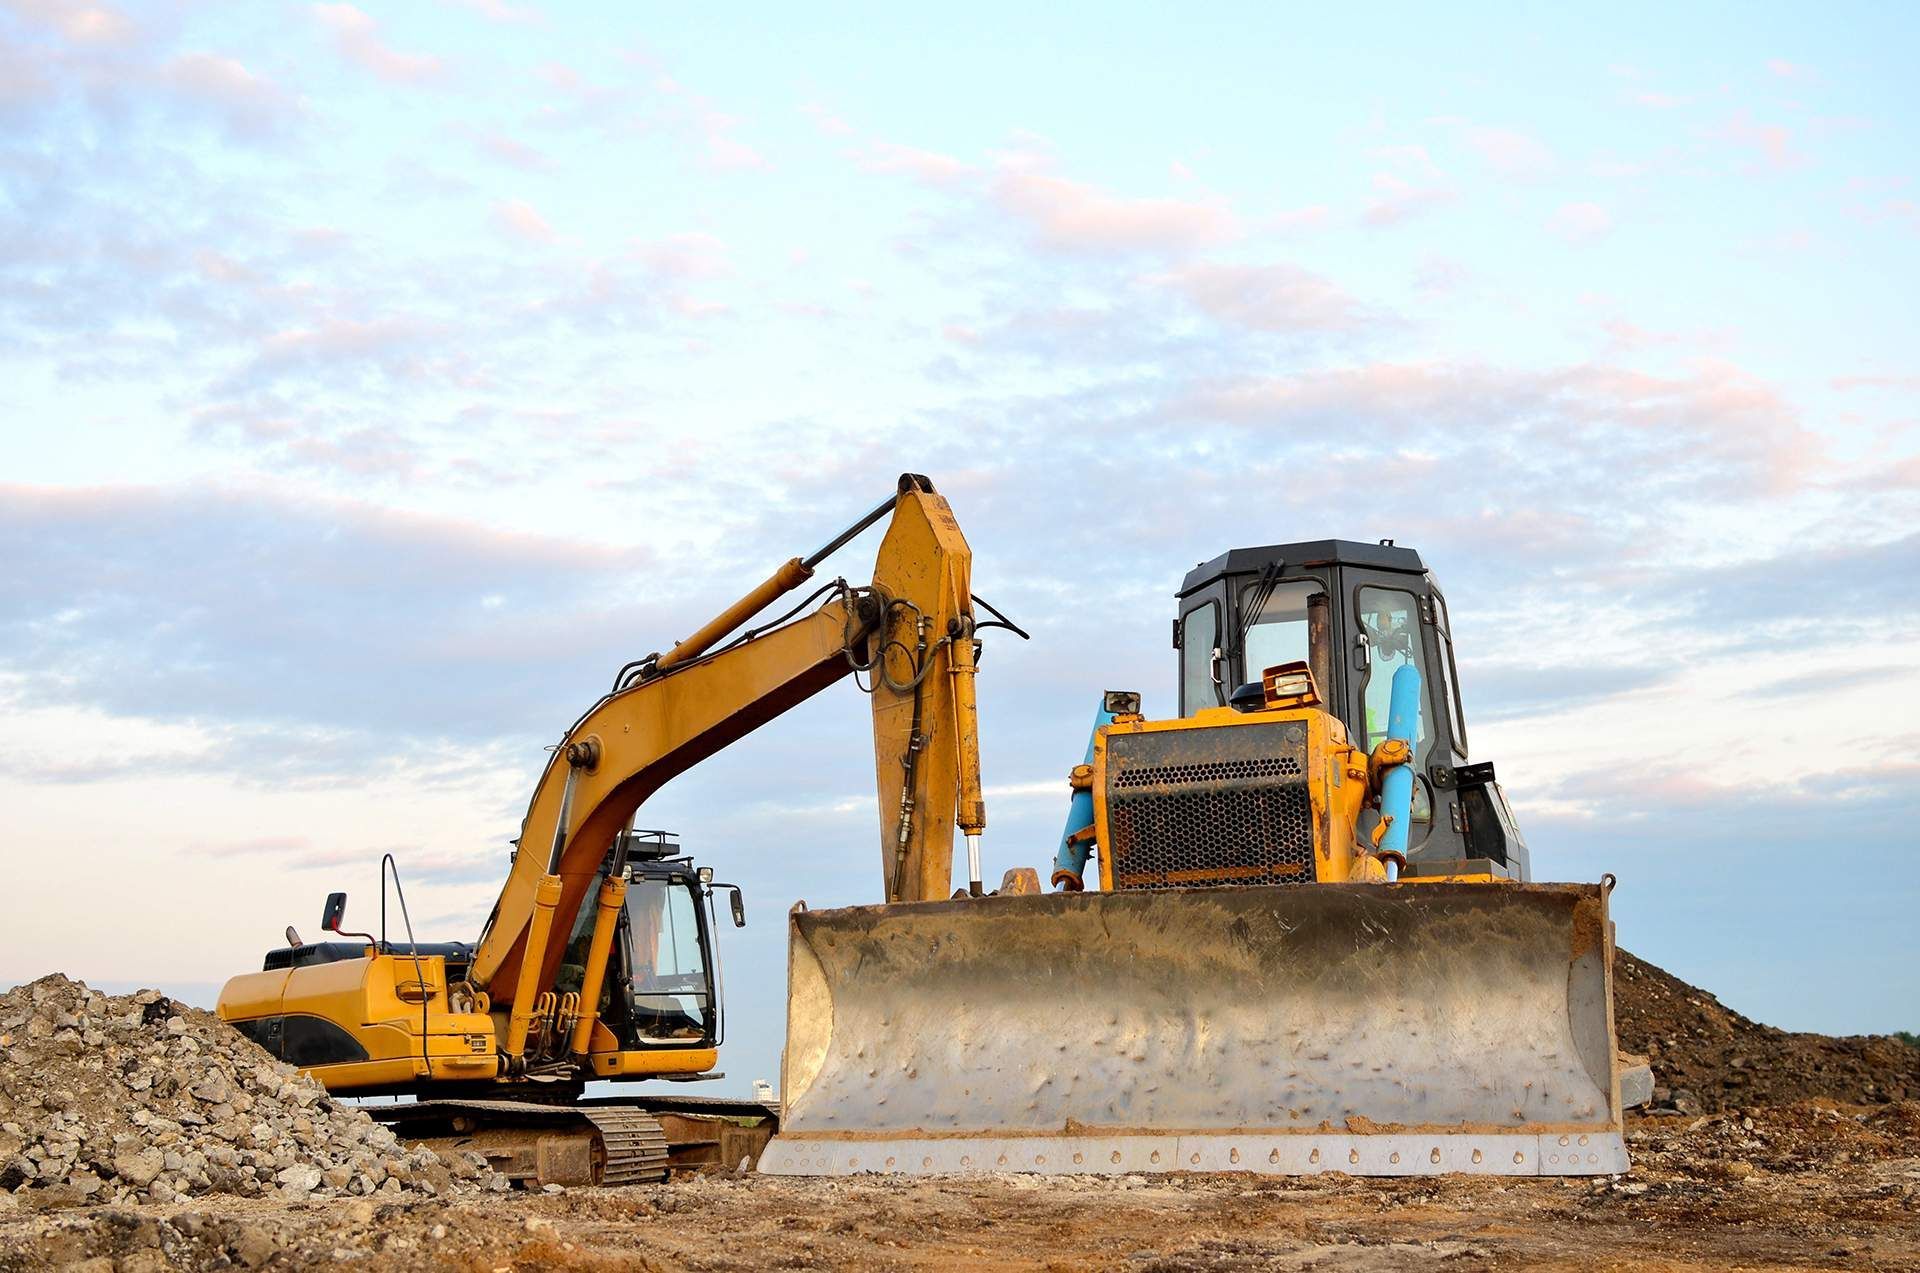 A bulldozer and an excavator are working on a construction site.